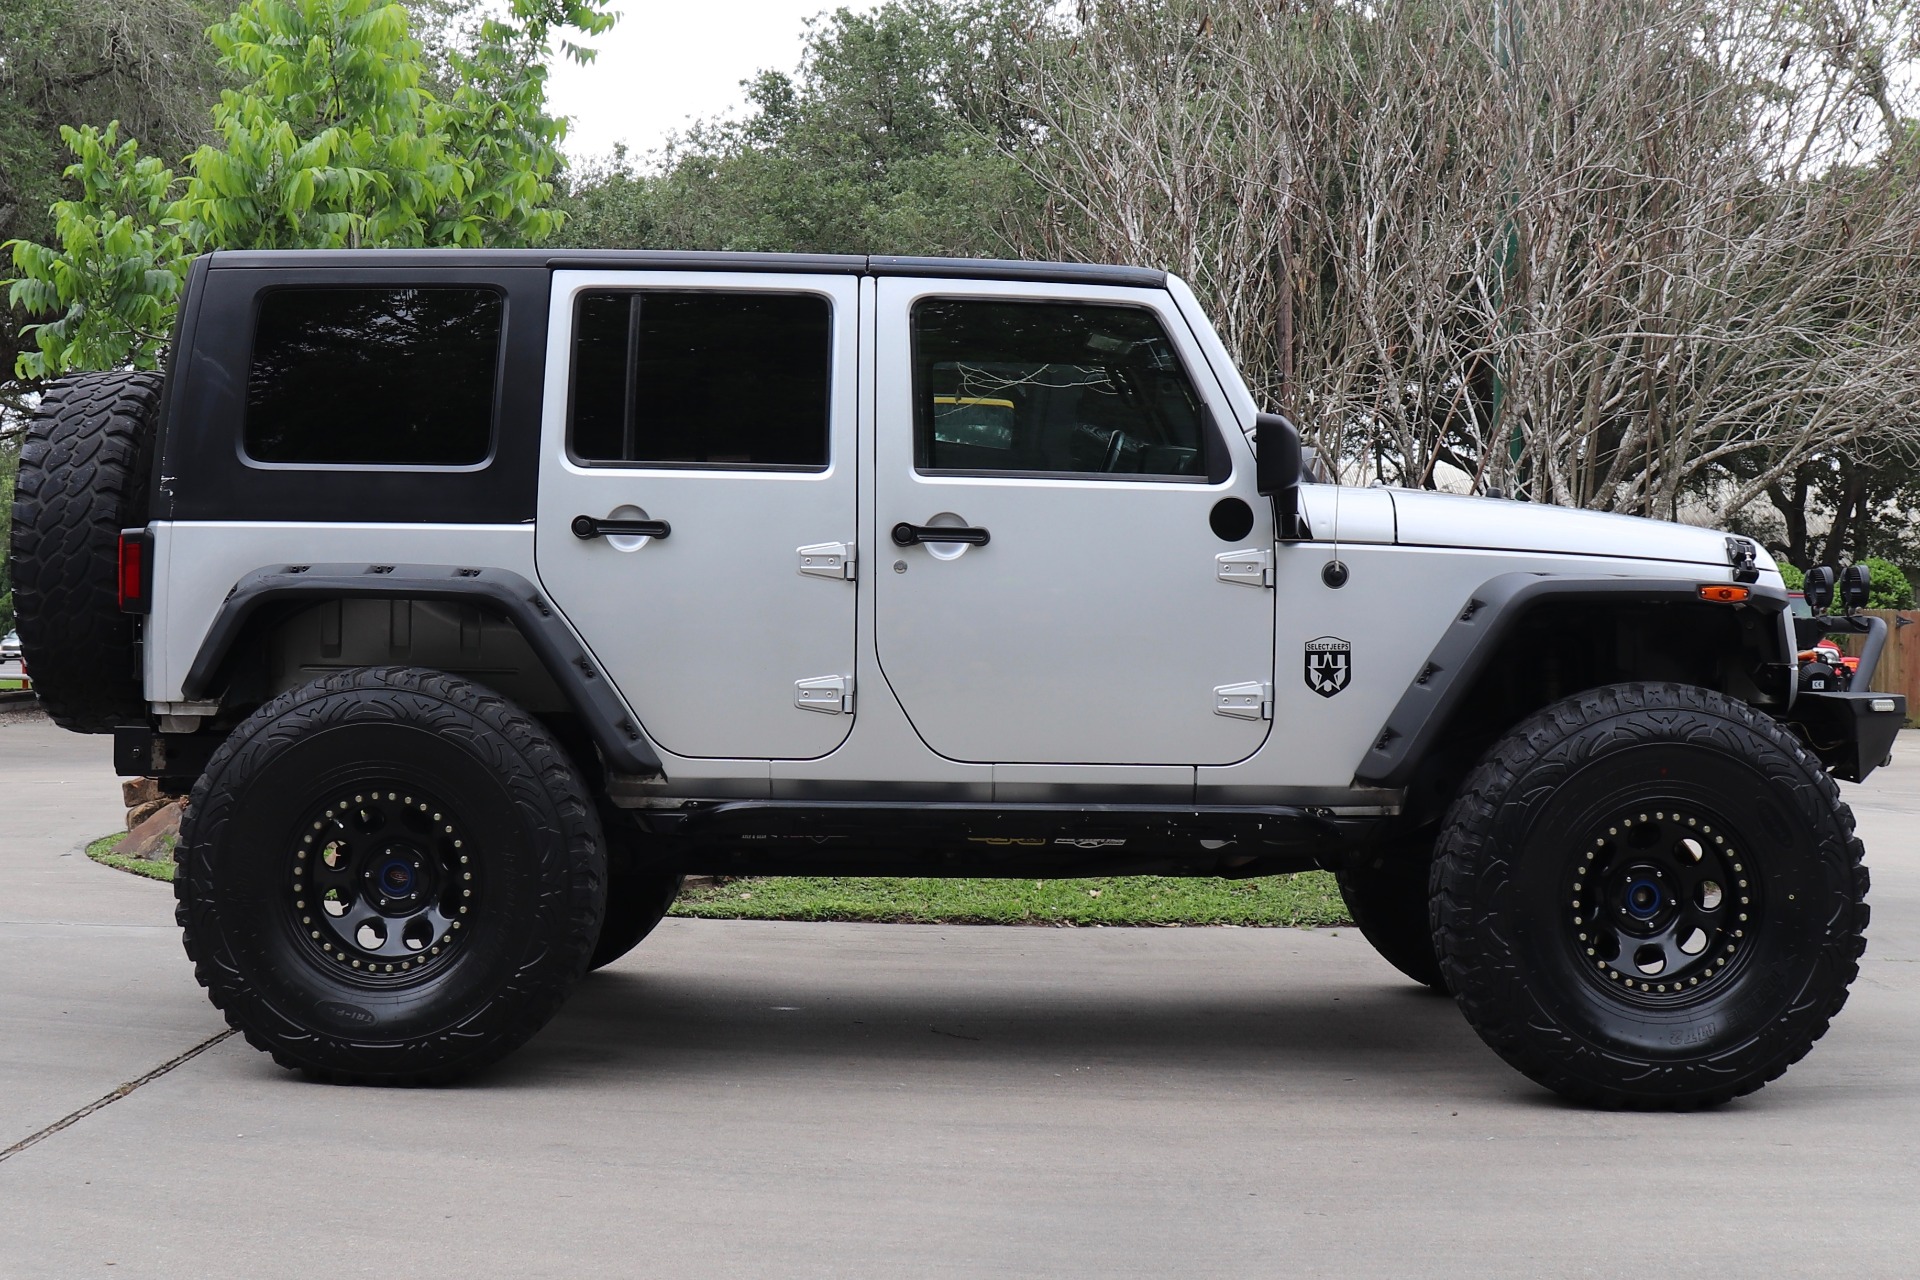 Used 2008 Jeep Wrangler Unlimited Rubicon For Sale ($24,995) | Select Jeeps  Inc. Stock #615442